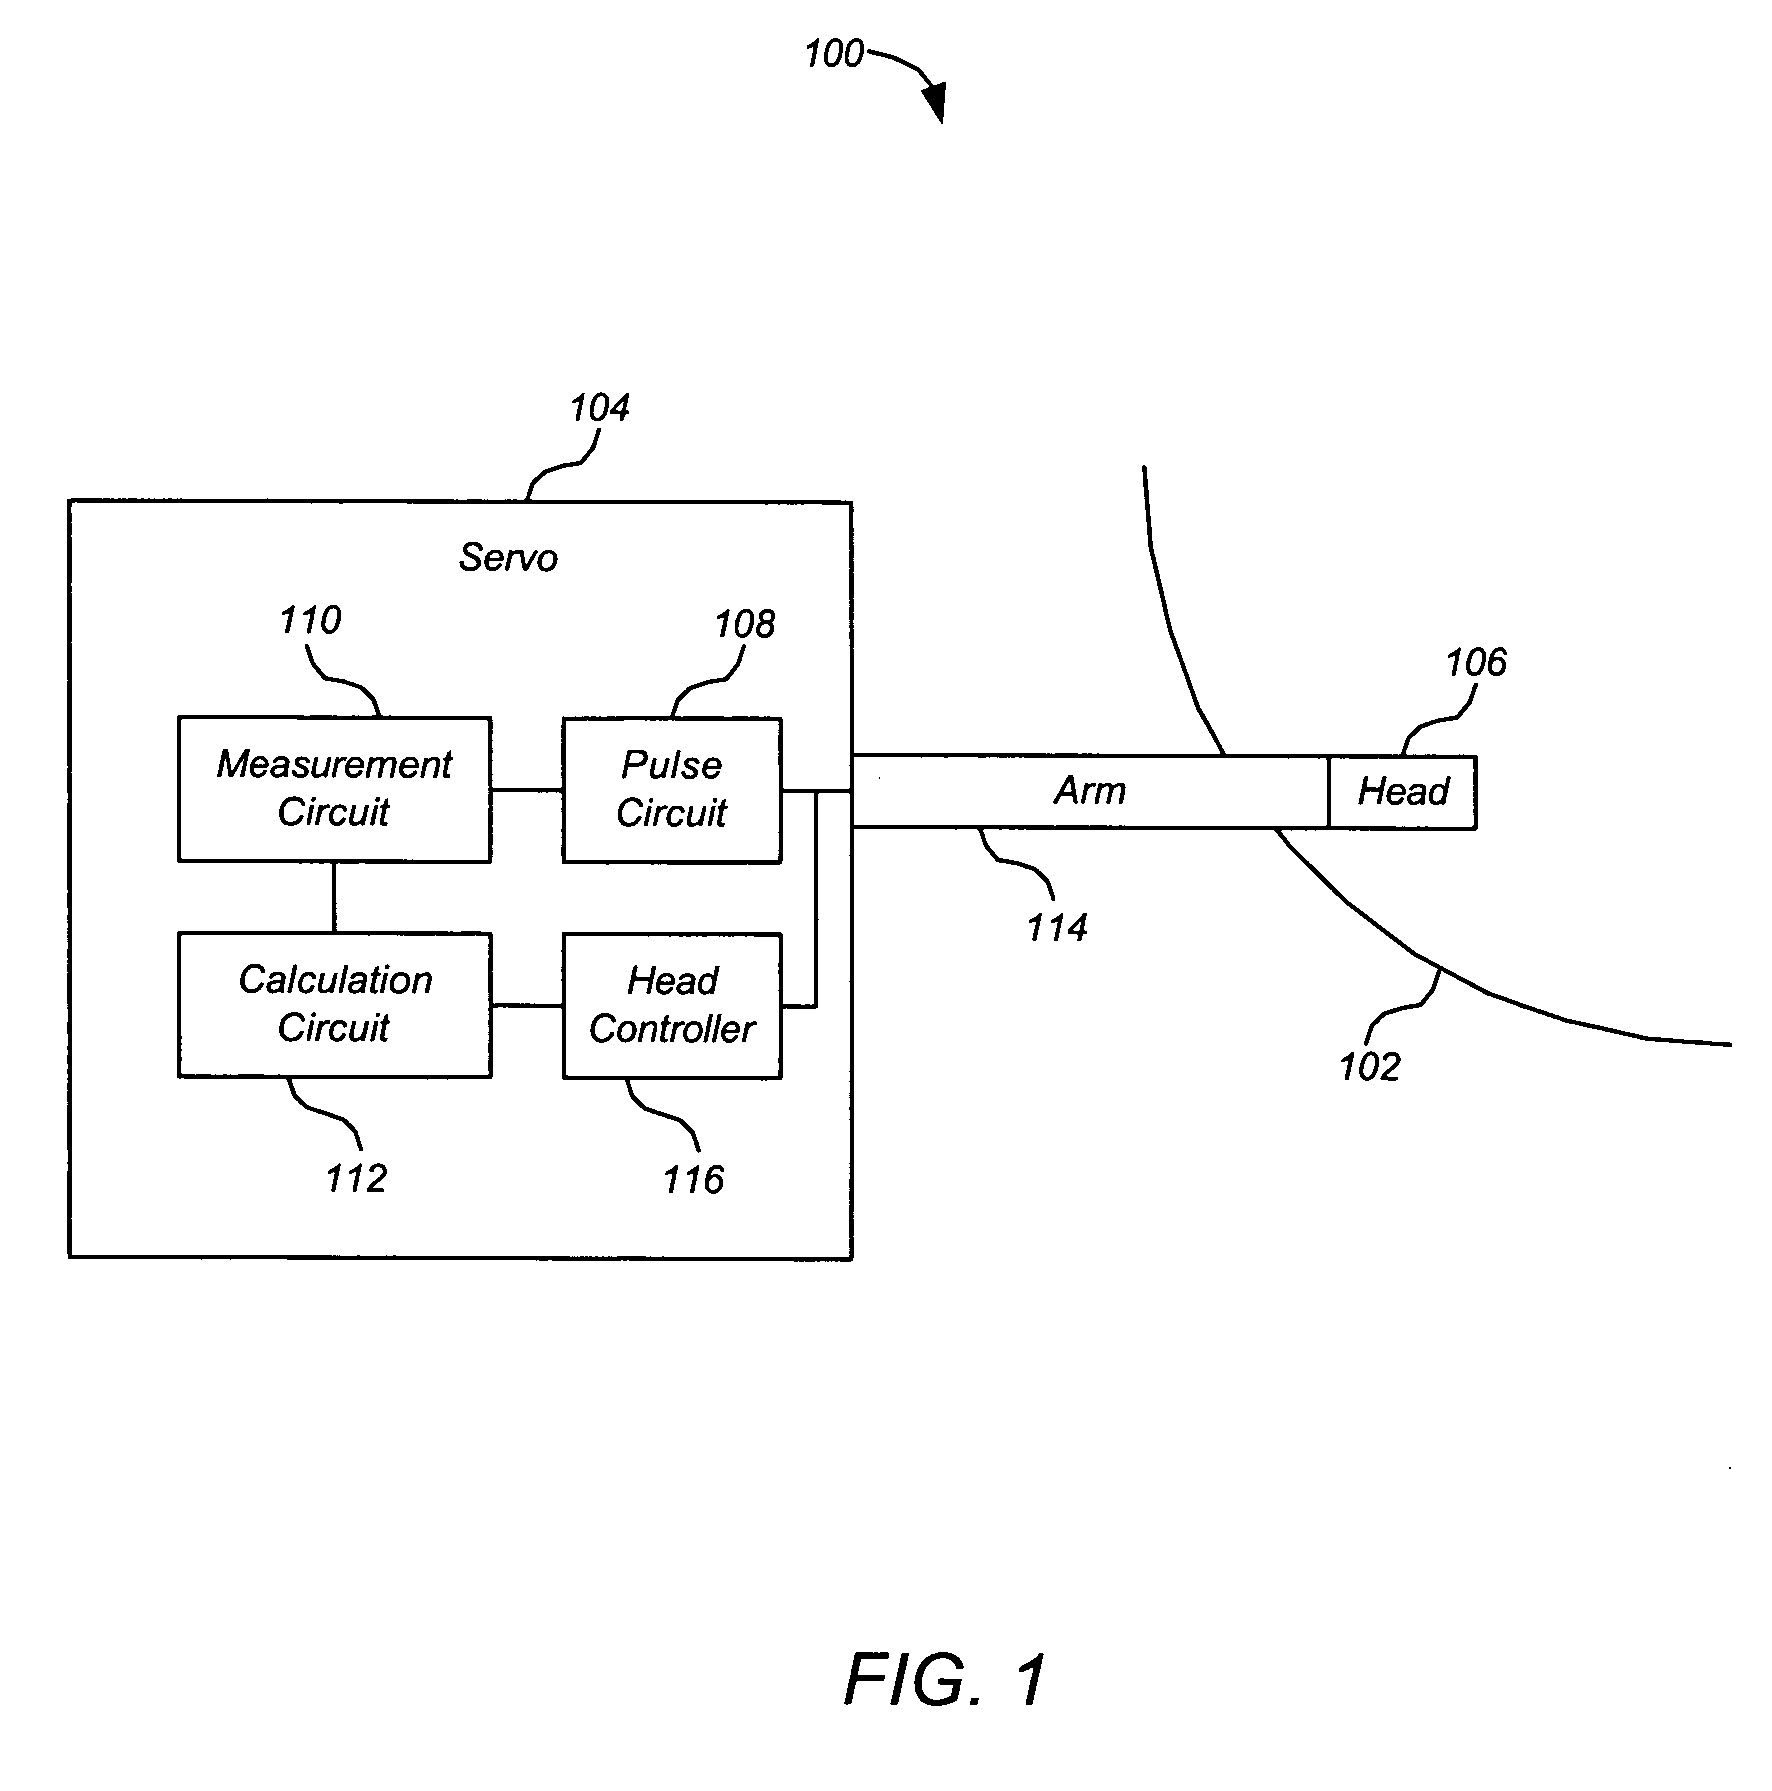 Detecting fly height of a head over a storage medium